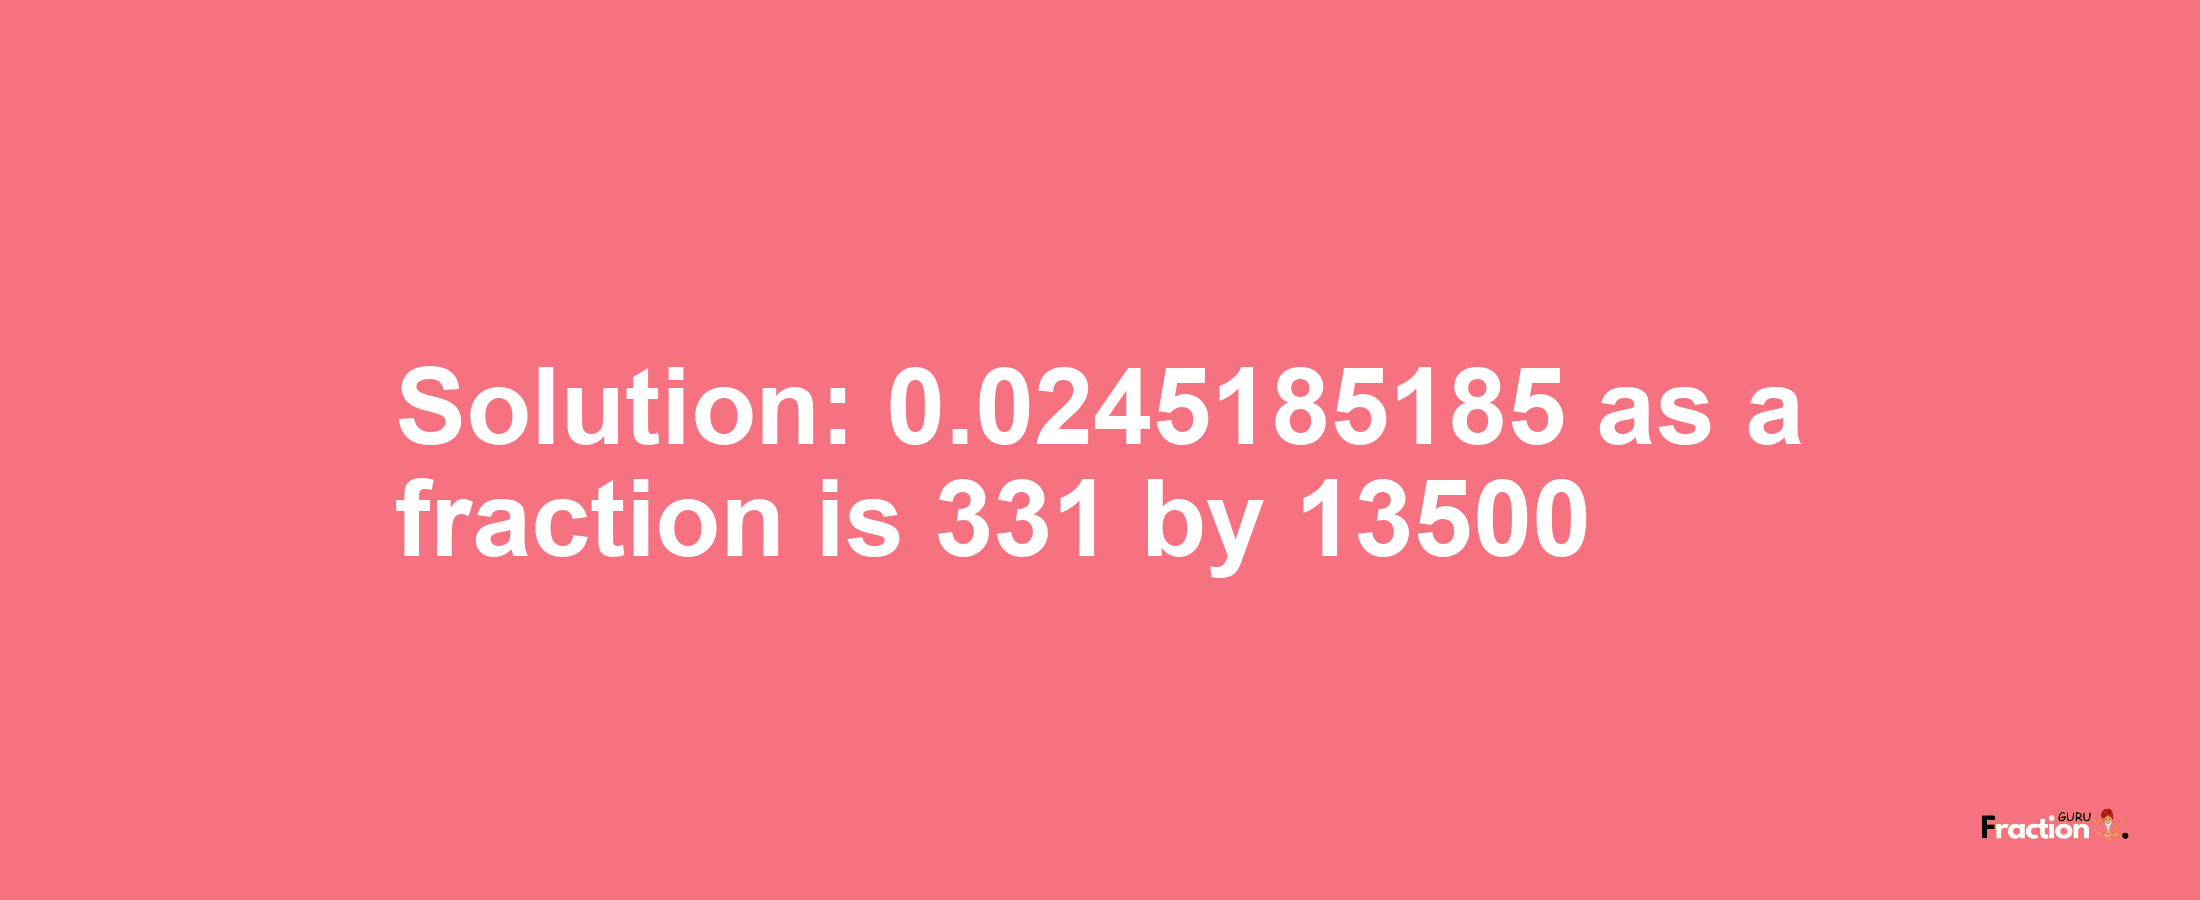 Solution:0.0245185185 as a fraction is 331/13500